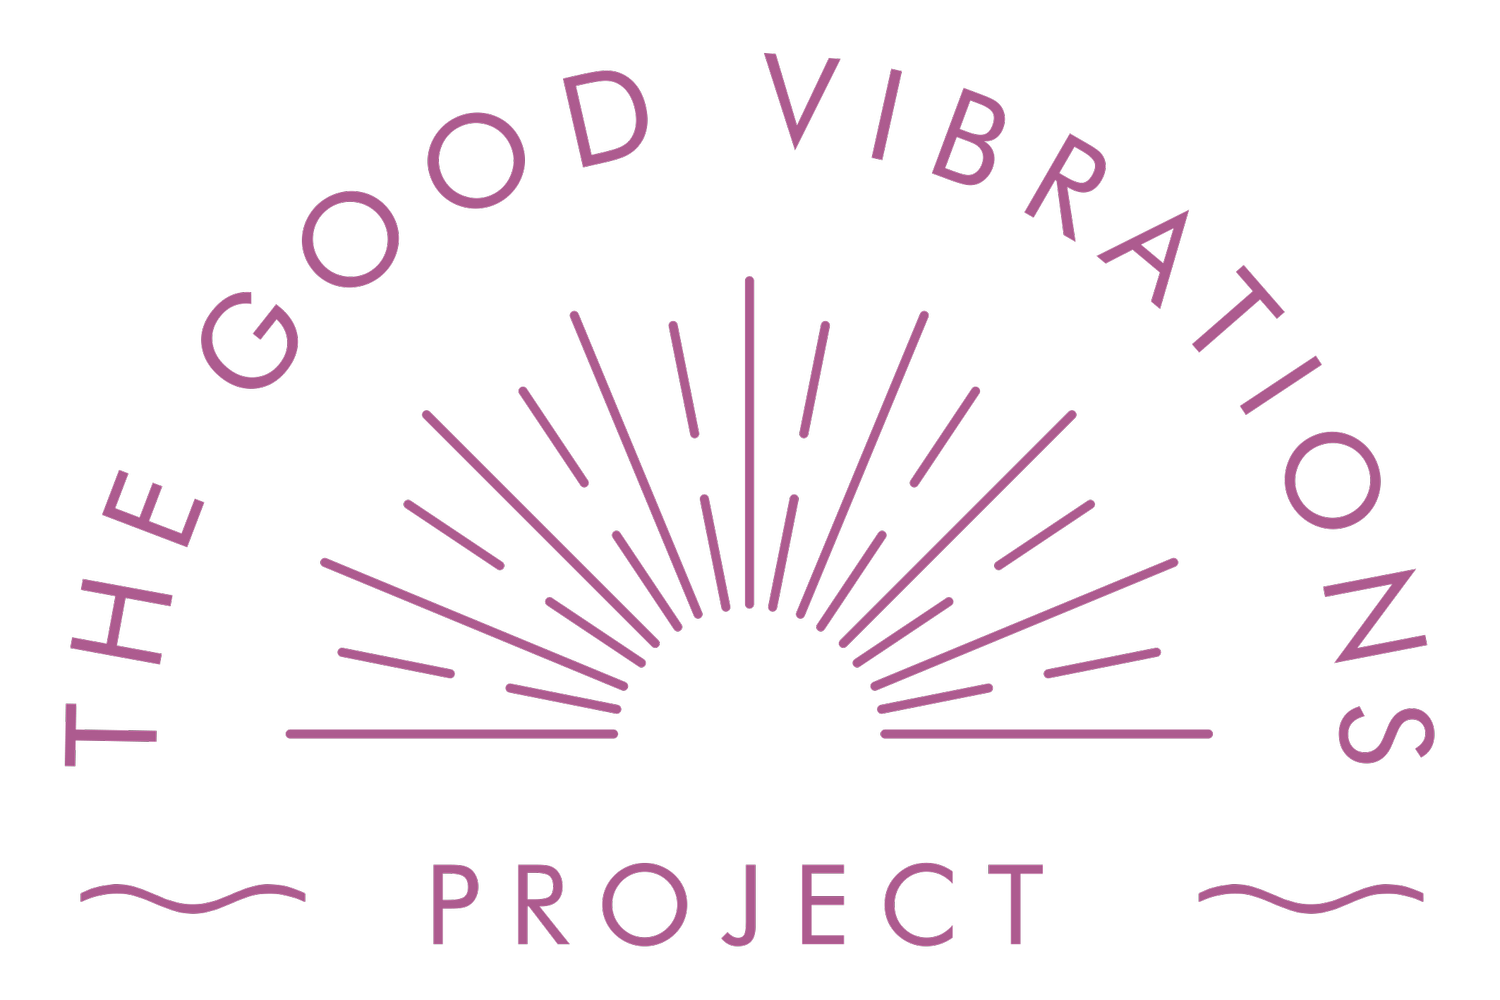 The Good Vibrations Project